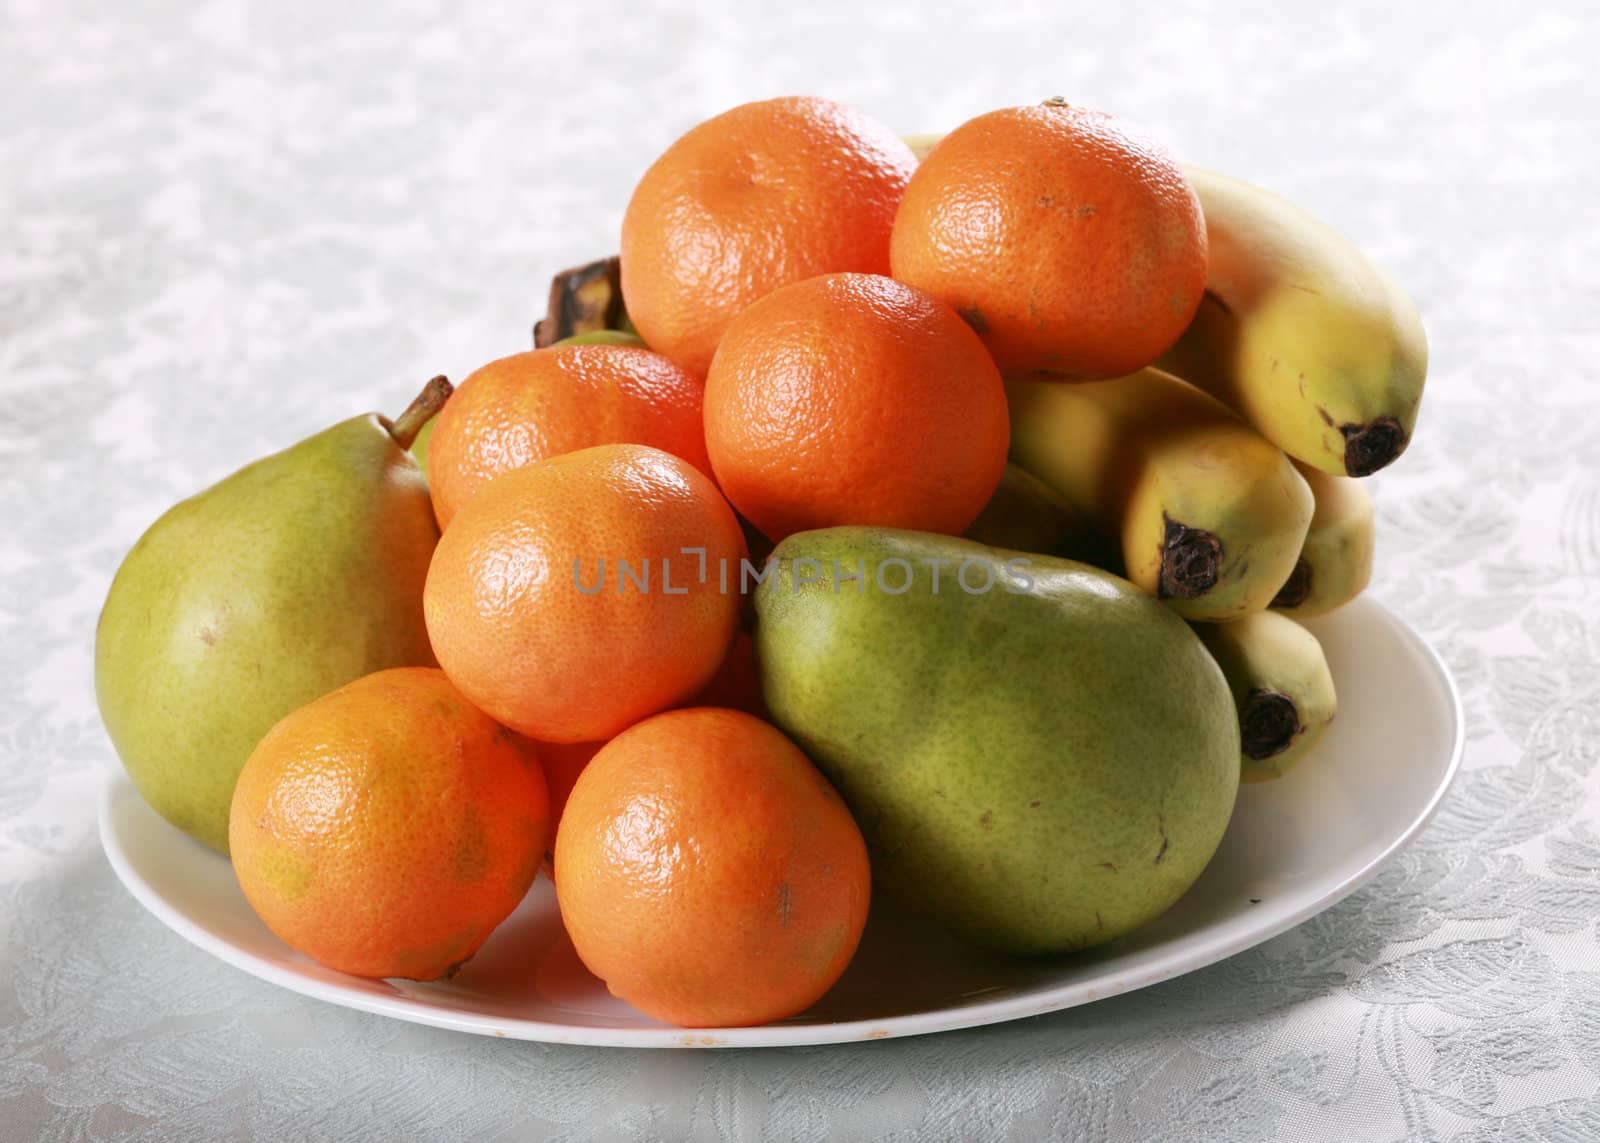 Plate of fresh fruit, clementine oranges, pears and bananas